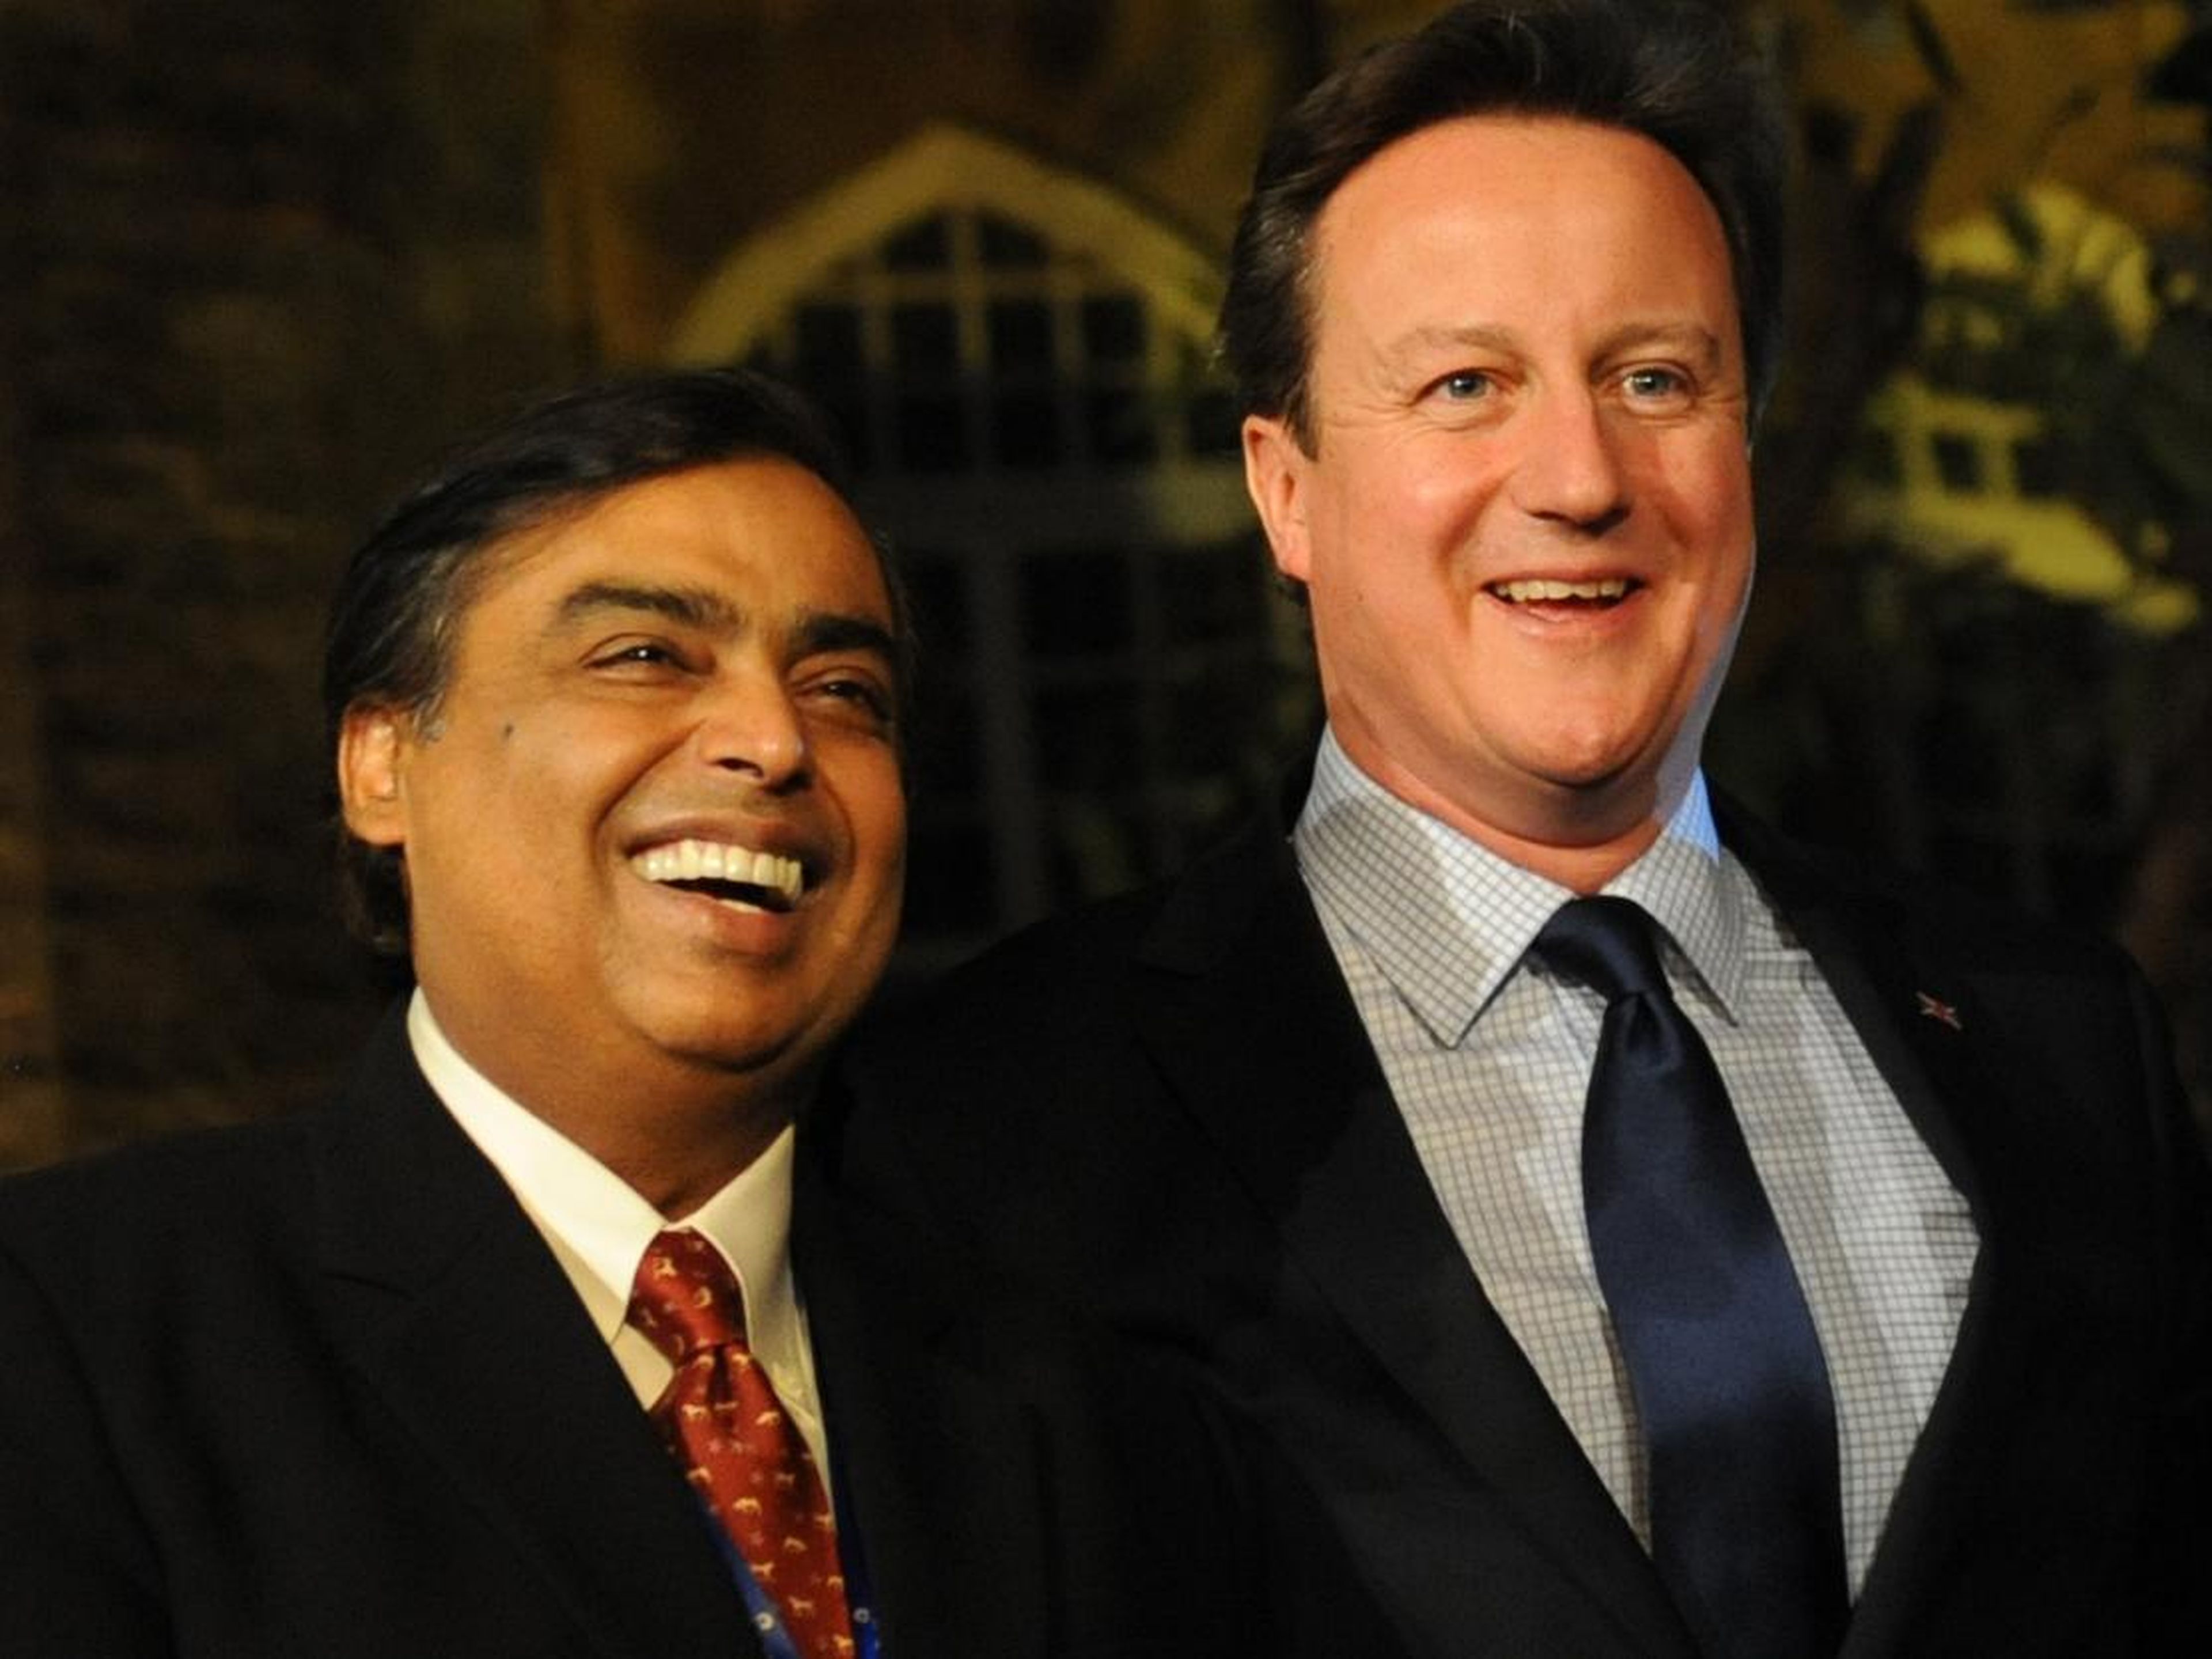 Mukesh Ambani and David Cameron at a reception for Indian and British businessmen and women in Mumbai in 2013.